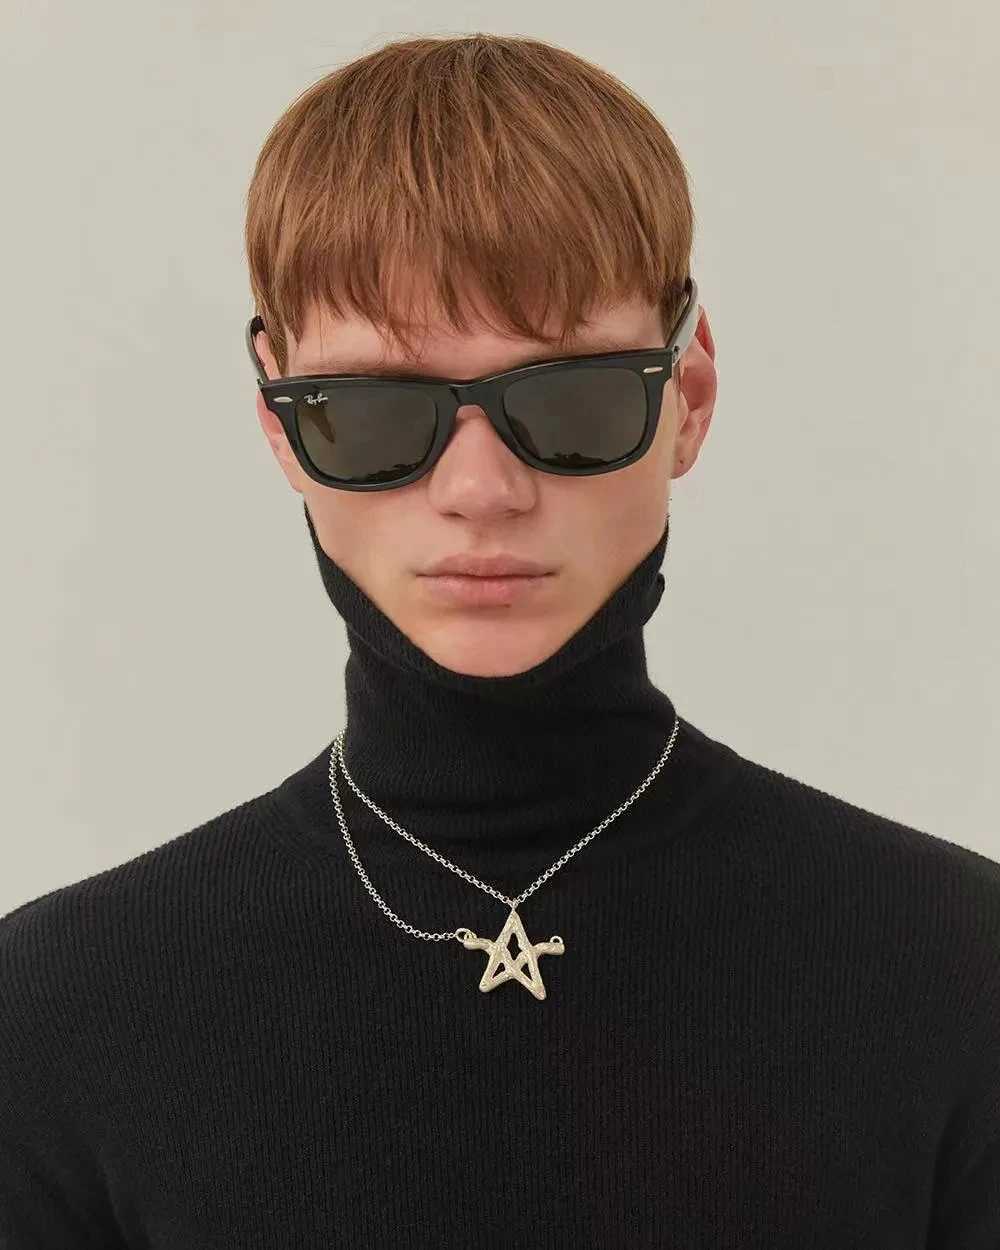 Pendant Necklaces New ADER Wild Necklace Sweater Chain Men and Women Couples Fashion Accessories Cool Letters Five-pointed Star Charm Jewelry Q240402